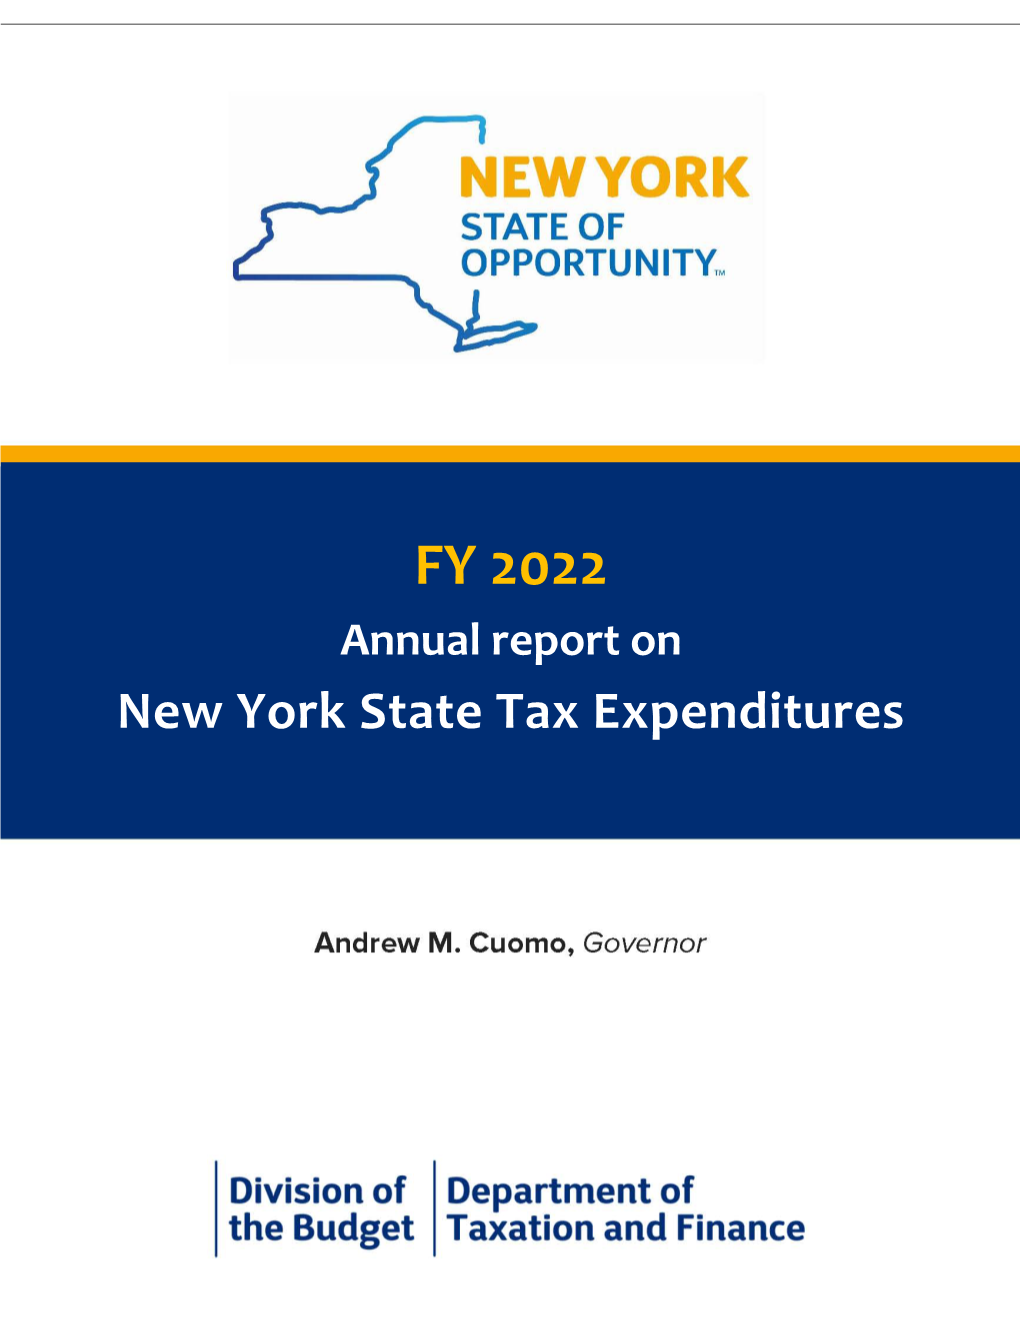 FY 2022 Annual Report on New York State Tax Expenditures